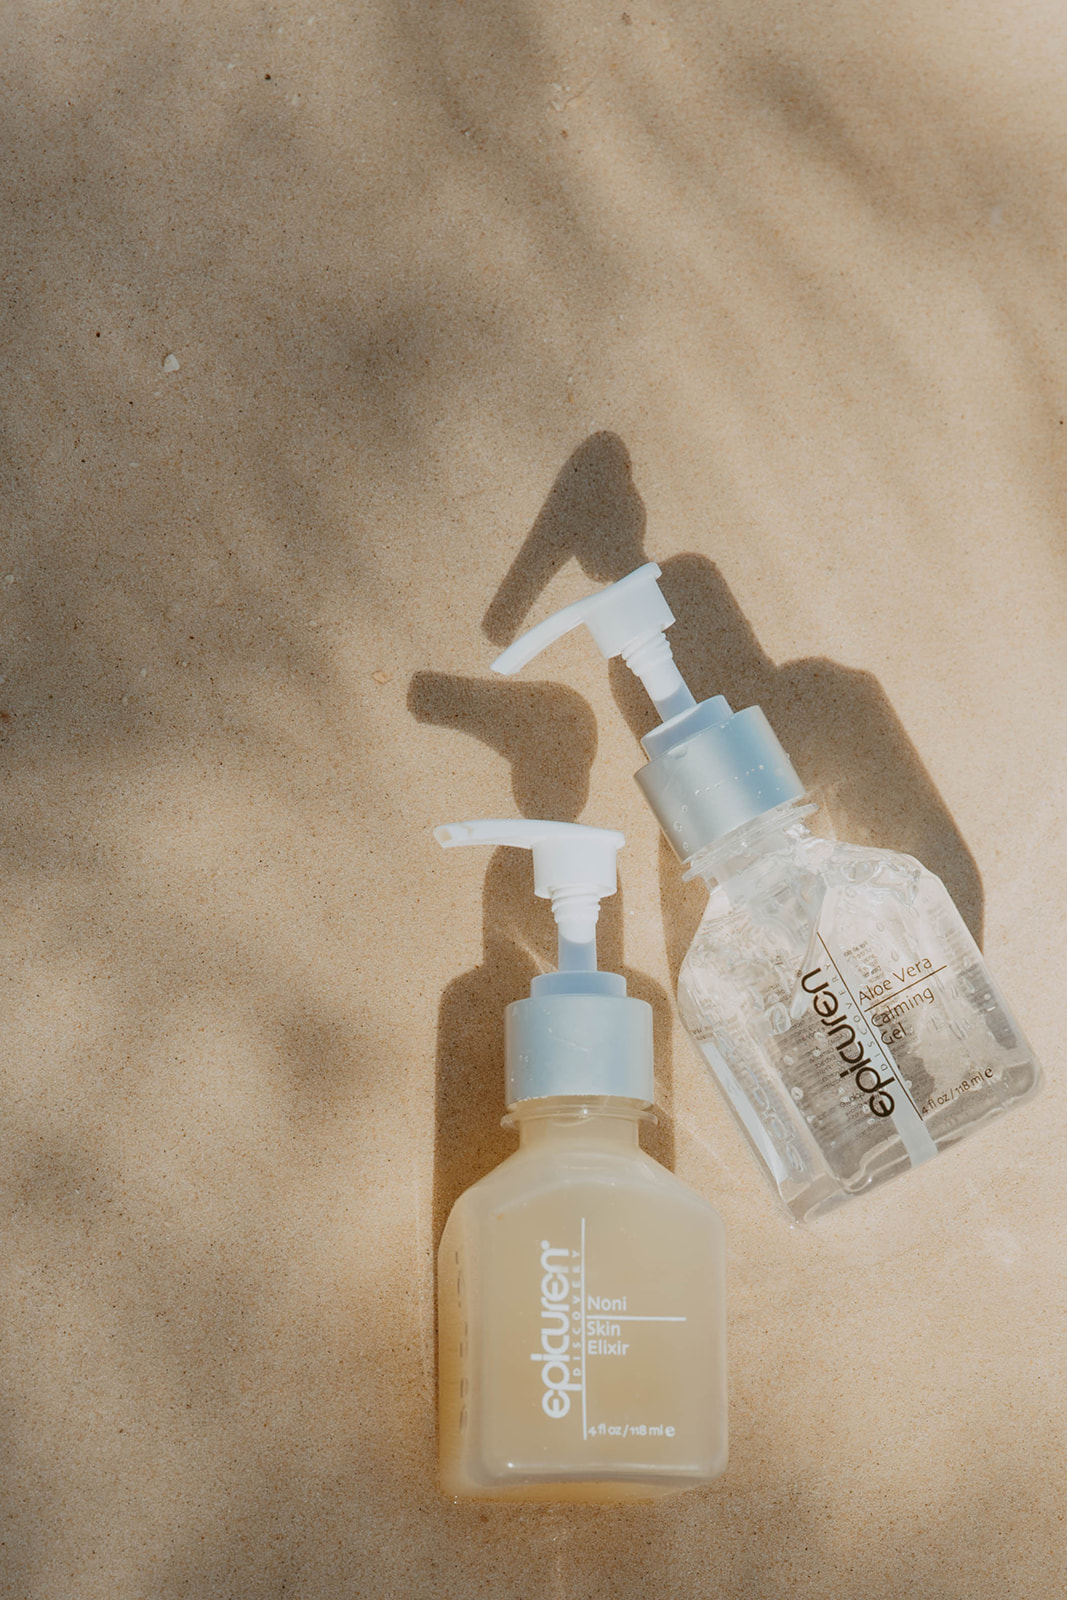 shot of two products laying on the beach